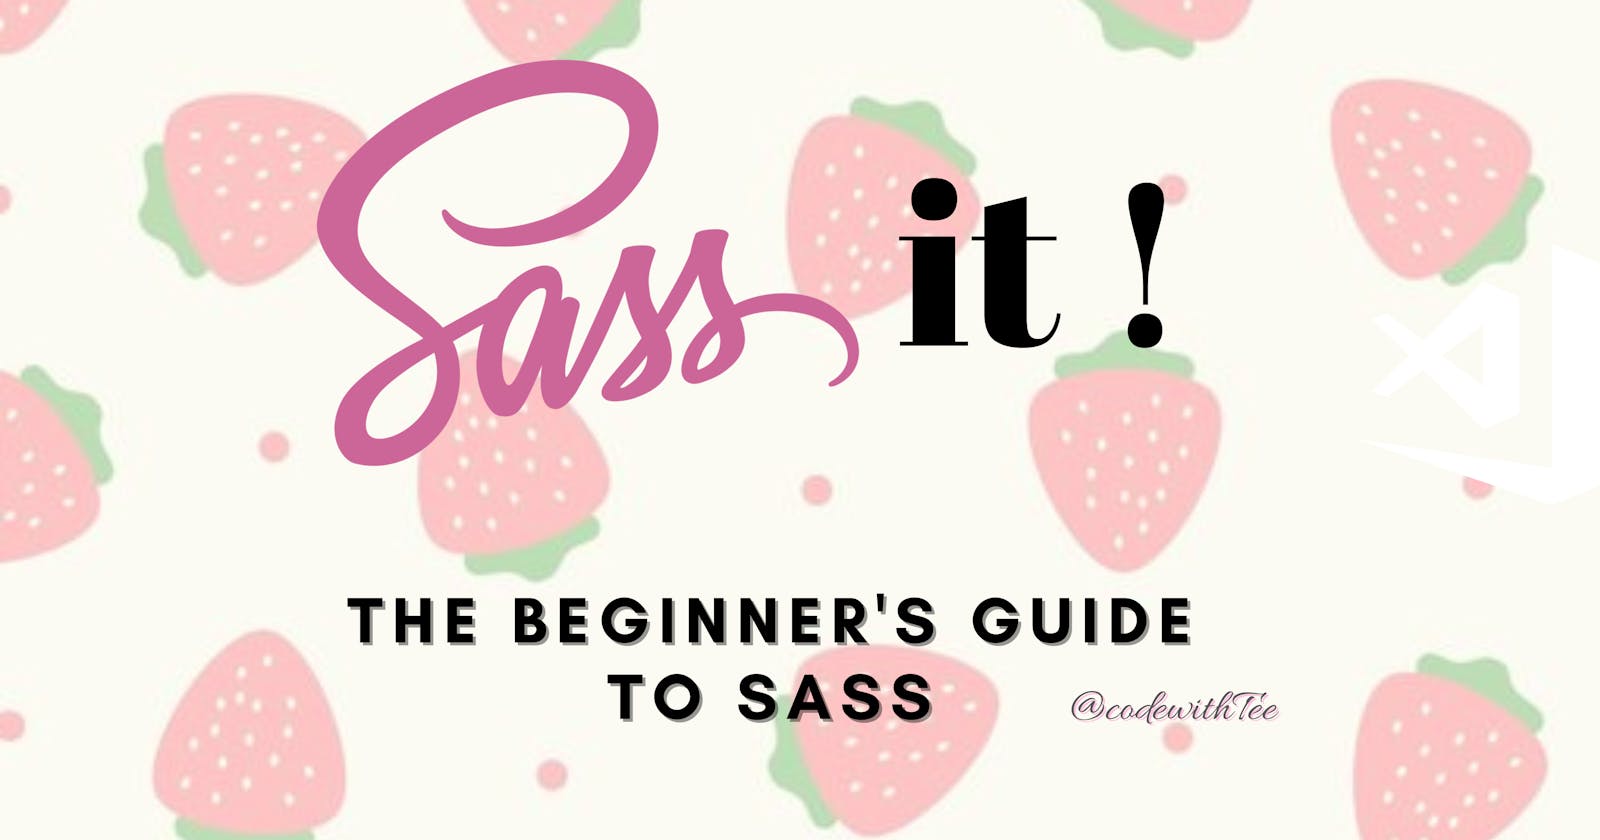 SASS IT! The Beginner's Guide to SASS